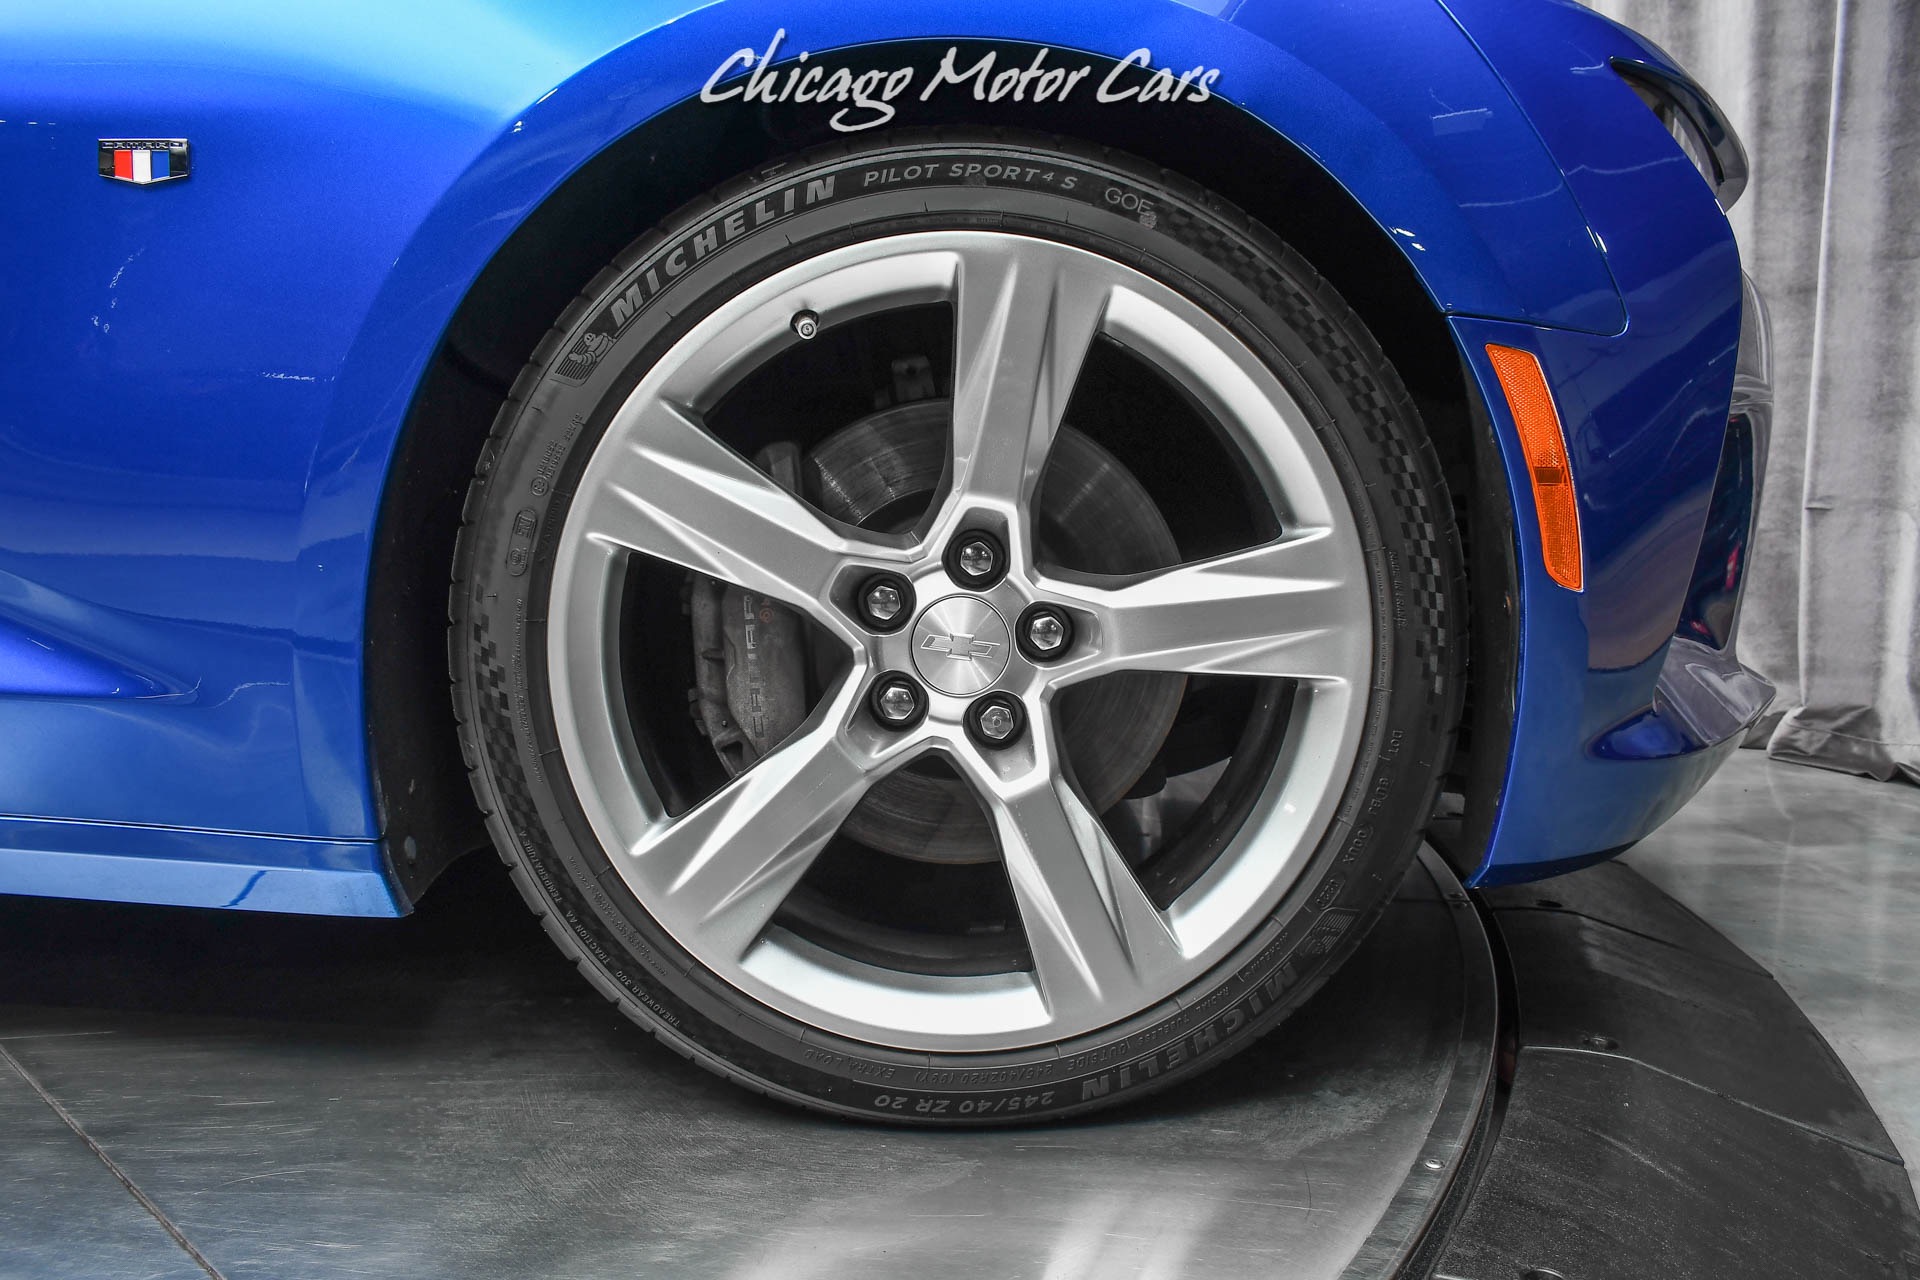 Used-2017-Chevrolet-Camaro-SS-Coupe-with-2SS-Hyper-Blue-Metallic-8-Speed-Auto